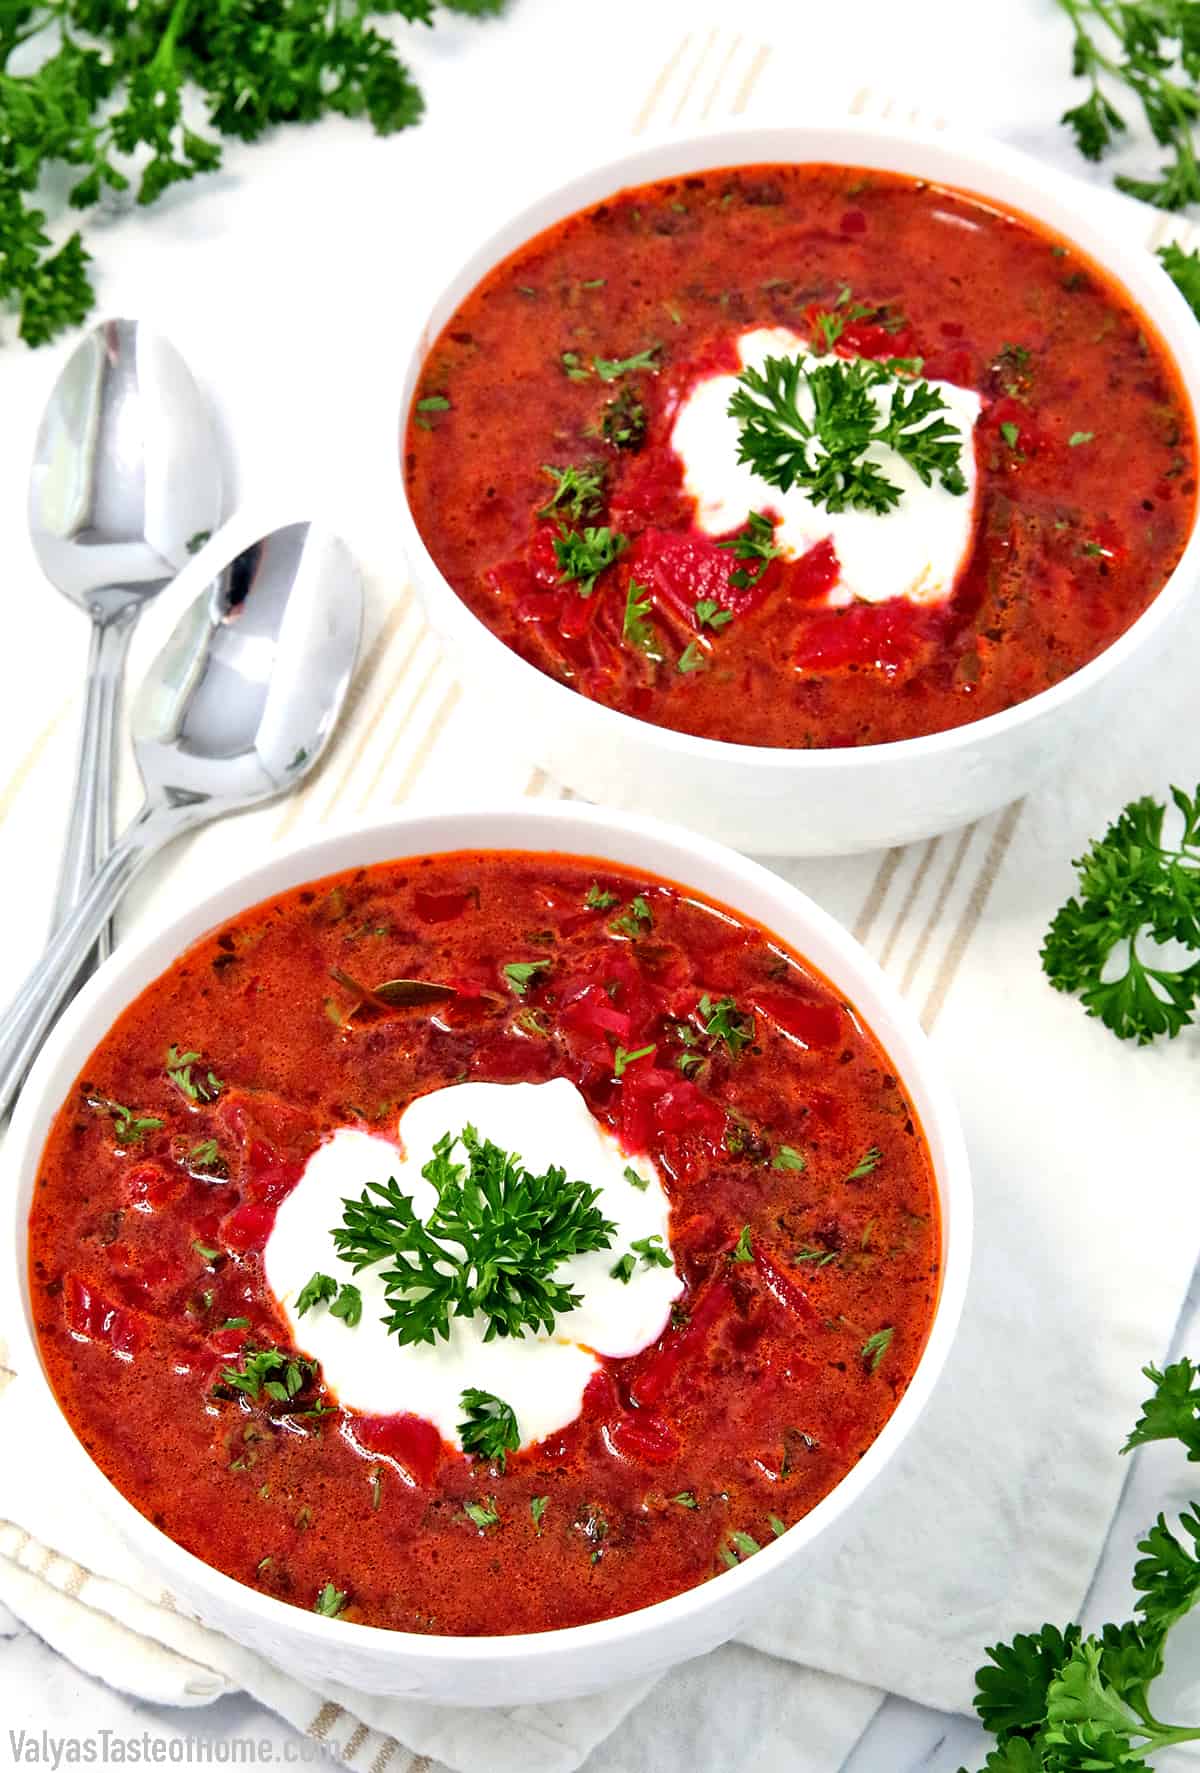 What are some of the foods that come to mind if you had to name a few Ukrainian meals quickly? I bet Red Borscht Recipe would pop into your mind. That's because it's one of the top iconic foods of Eastern and Central Europe.